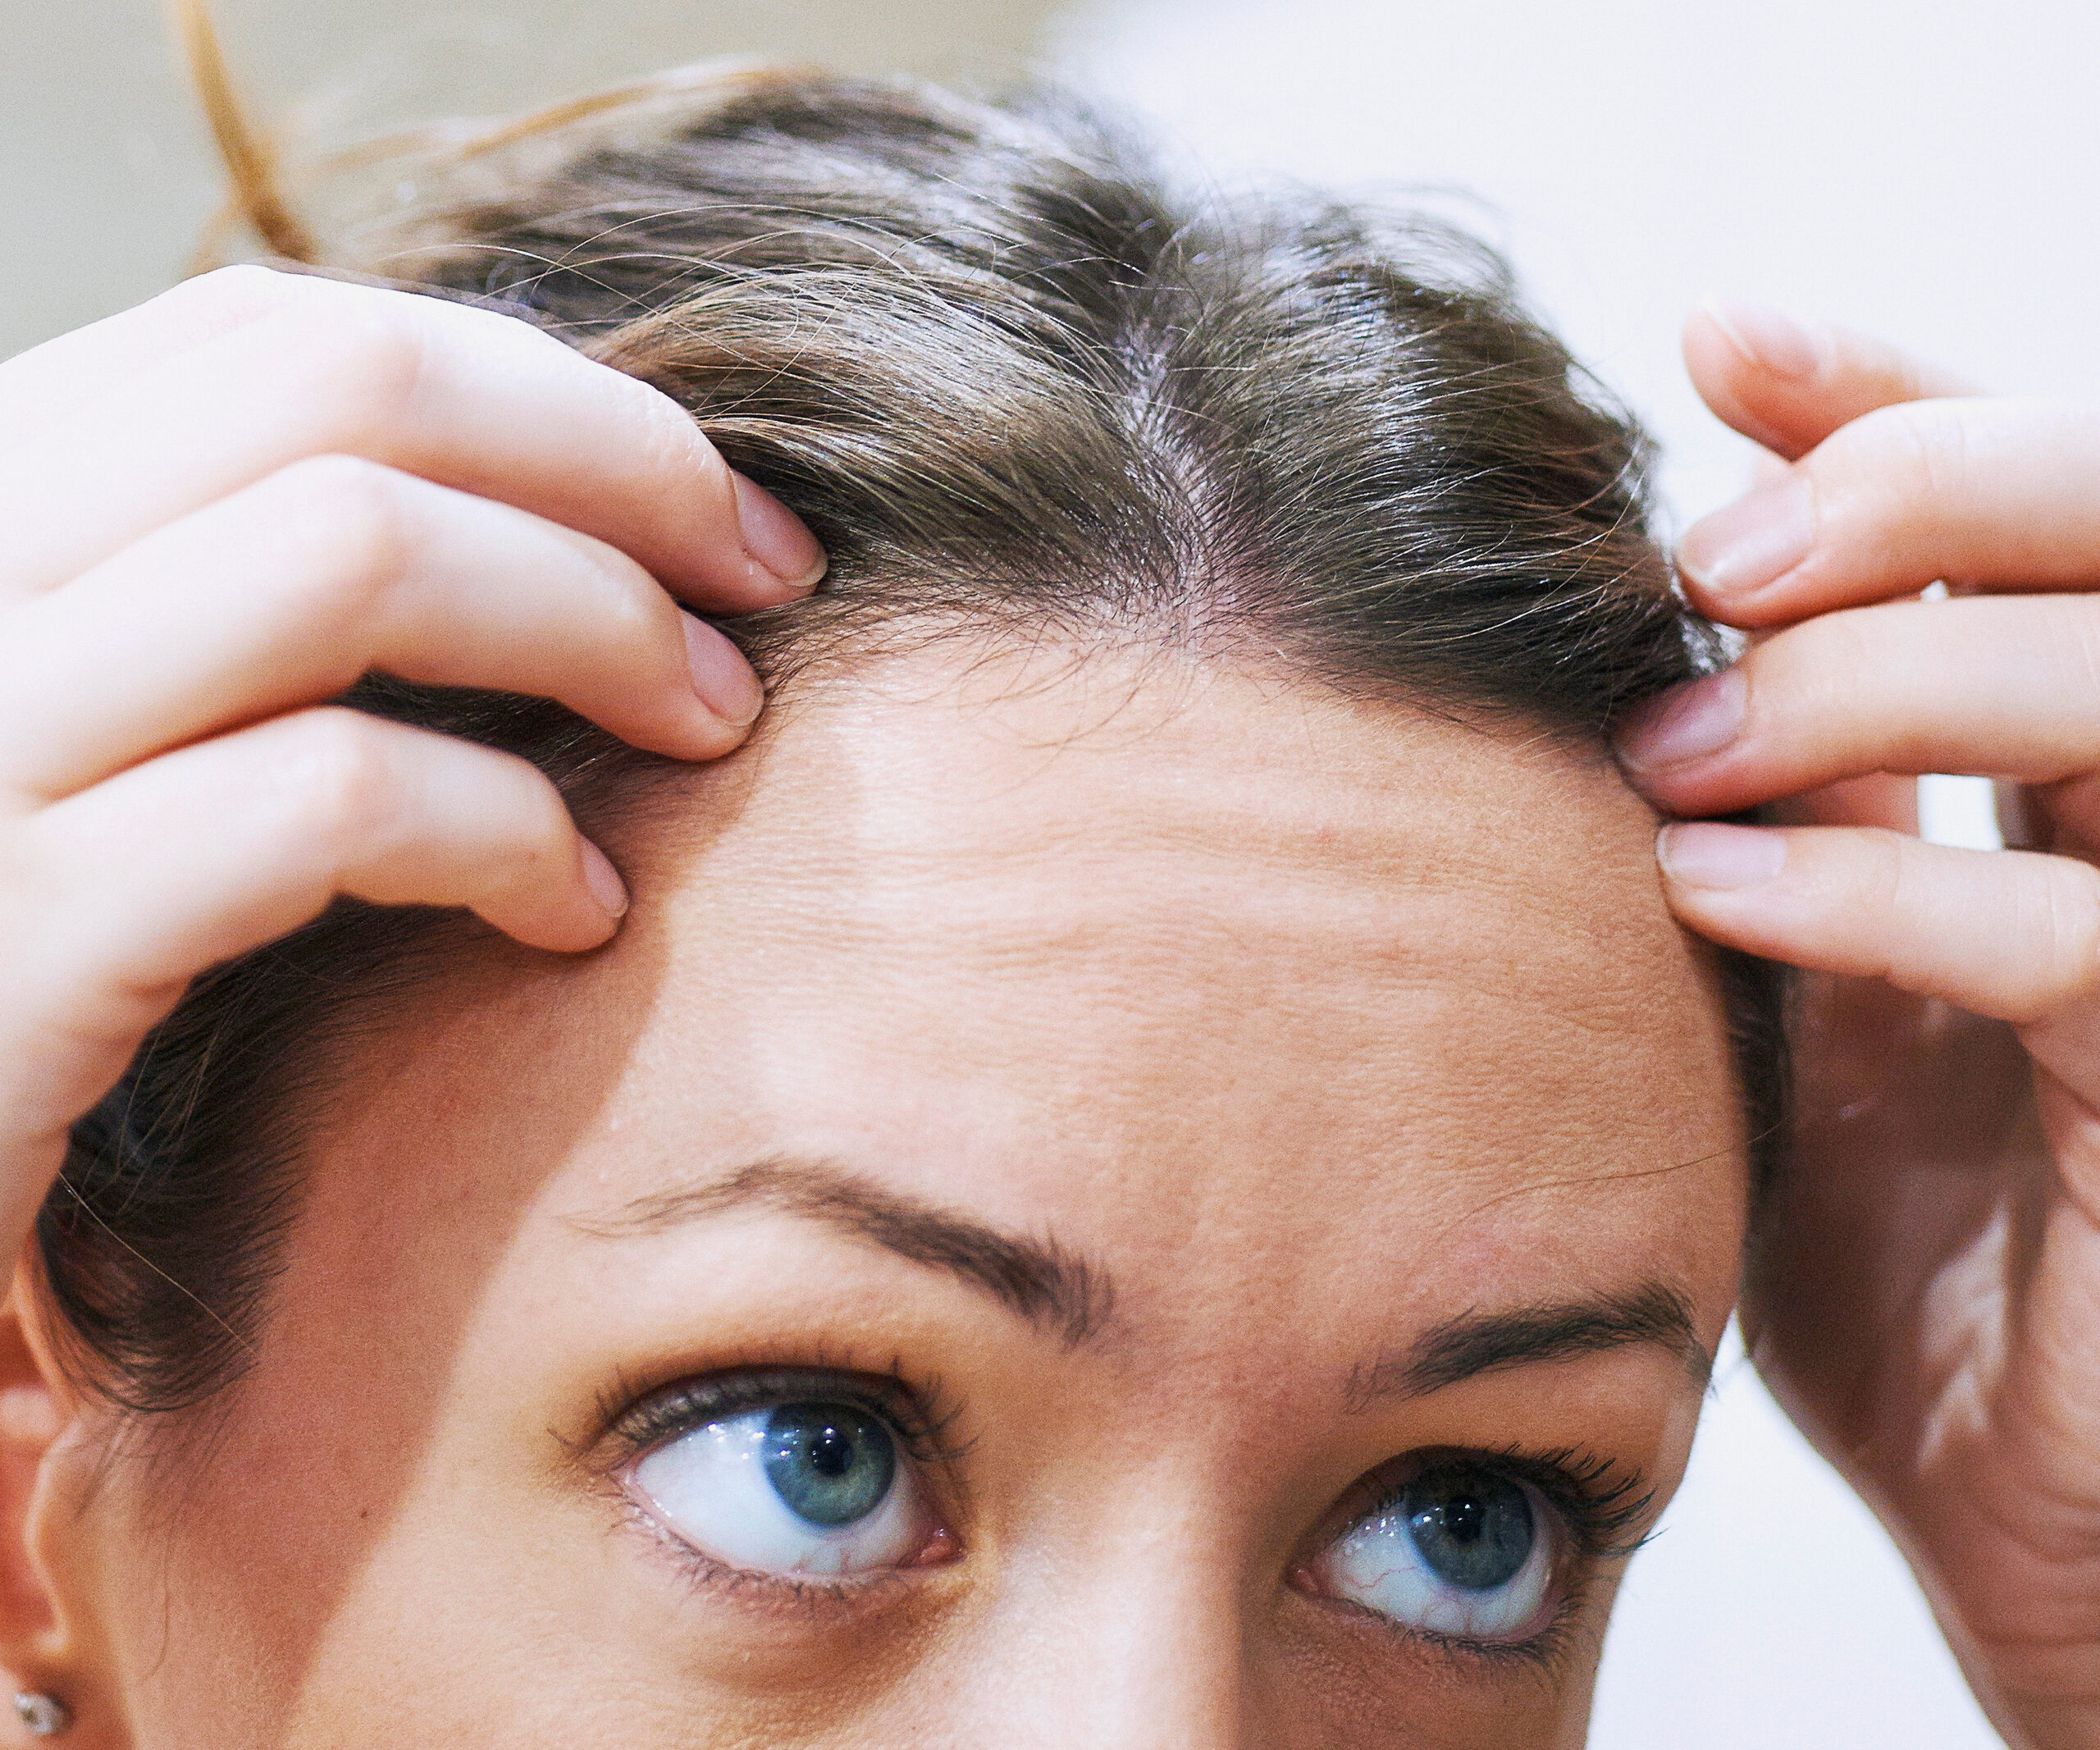 Is your hair making you depressed?